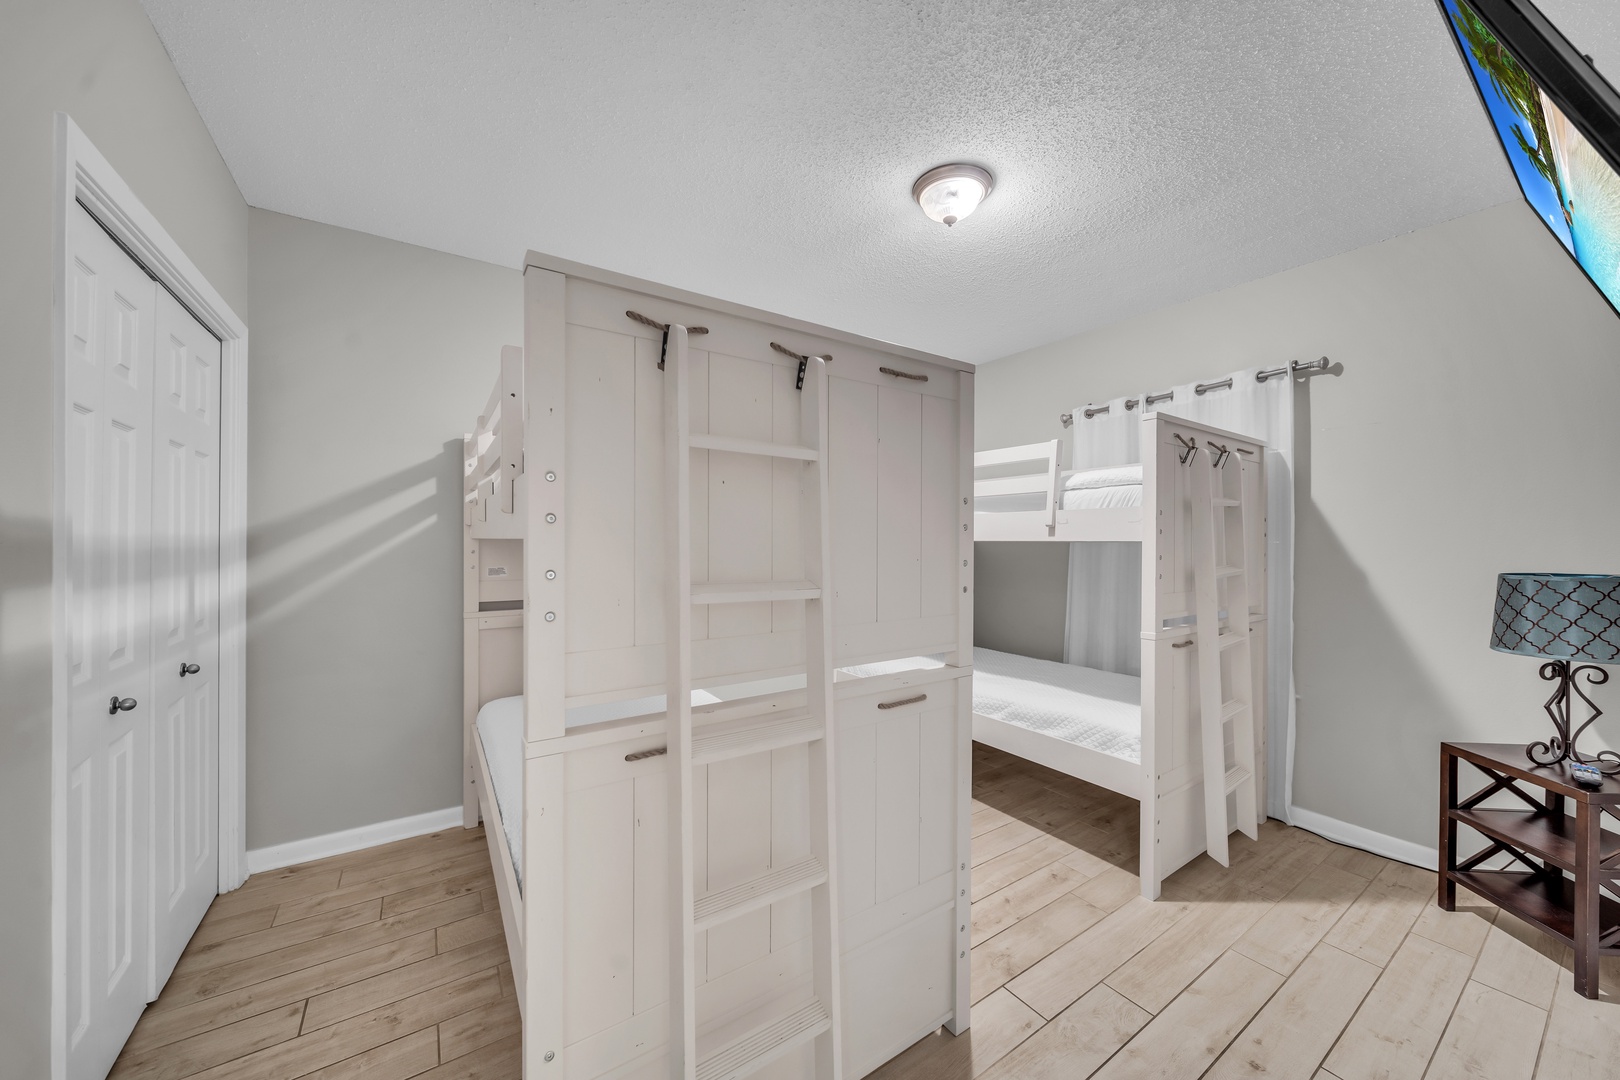 The second Guest Bedroom, a haven for the younger ones, features two sets of Bunk Beds with twin-size mattresses, accommodating an additional 4 people.